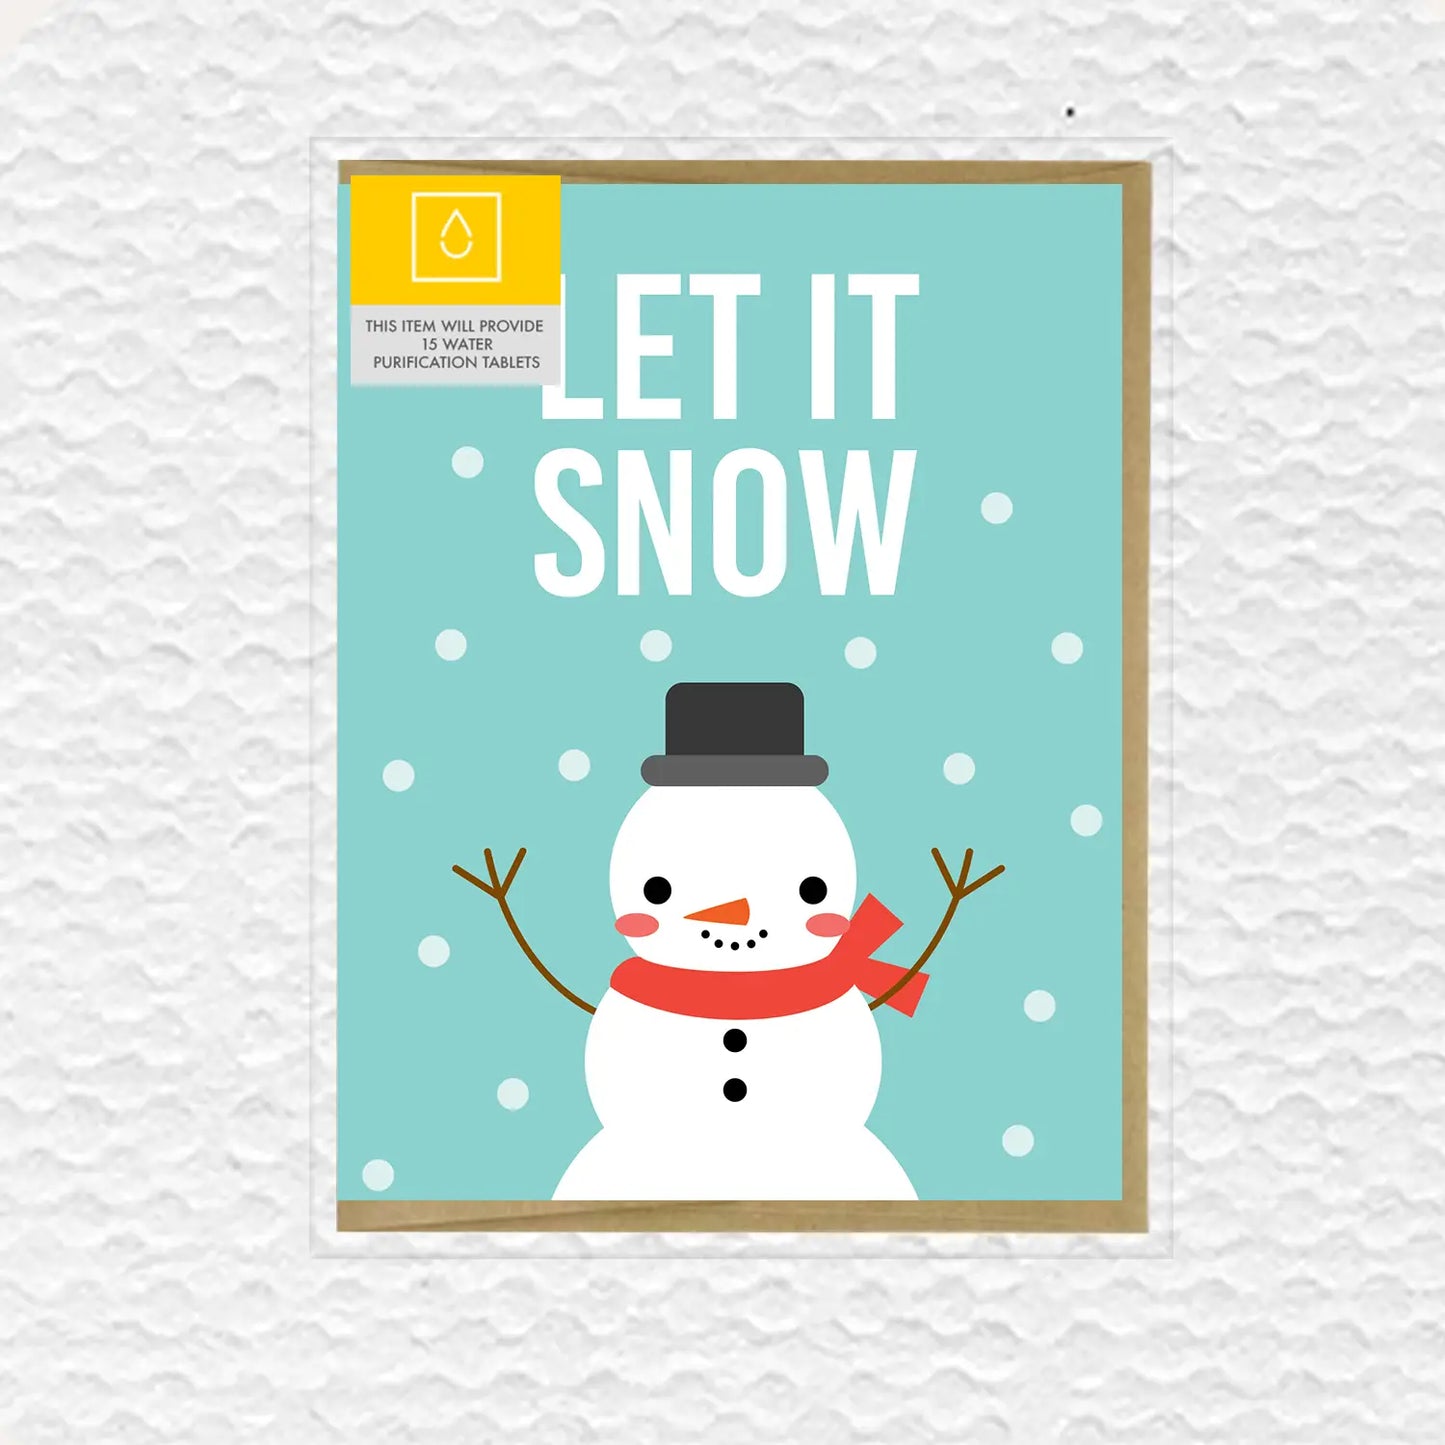 Let It Snow Holiday Card